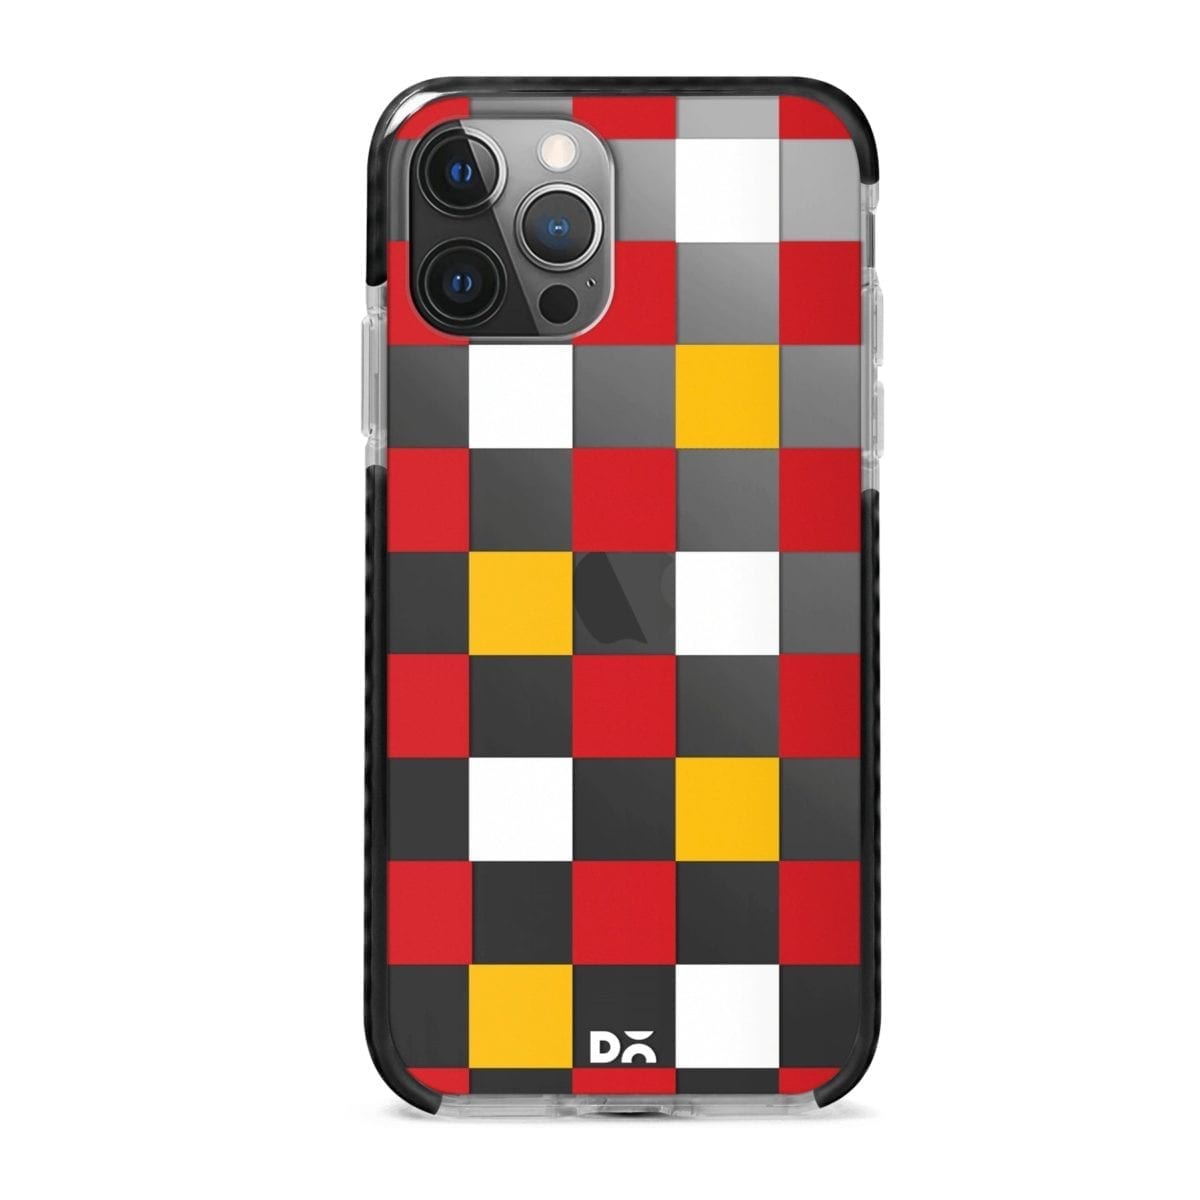 Small Tricolour Checks Stride Case Cover for Apple iPhone 12 Pro and Apple iPhone 12 Pro Max with great design and shock proof | Klippik | Online Shopping | Kuwait UAE Saudi